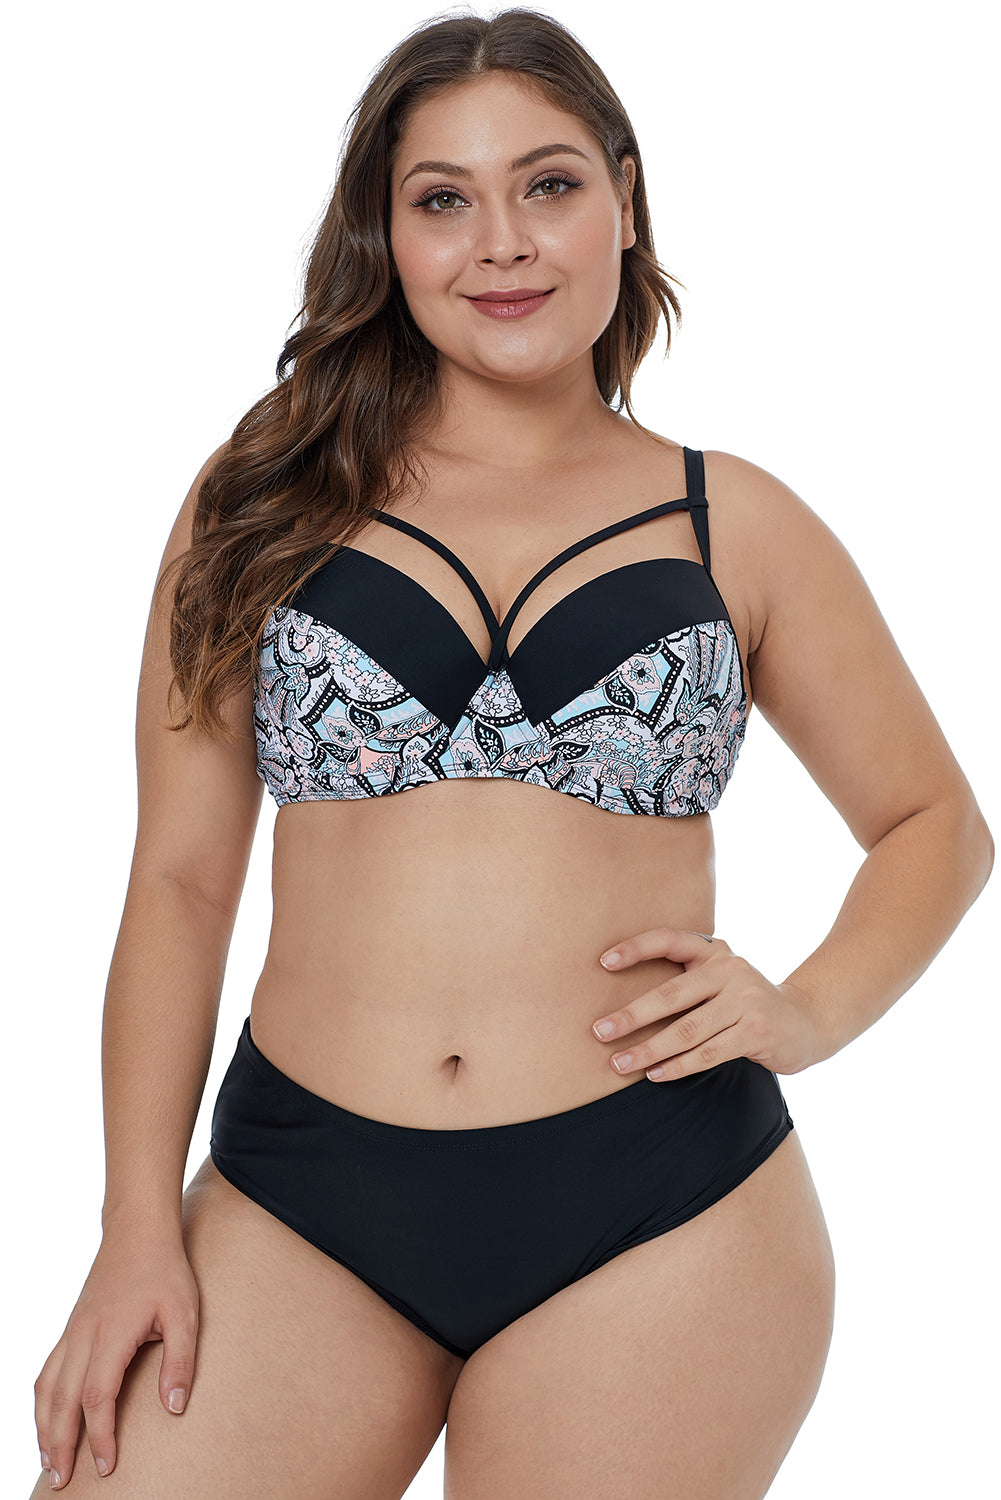 Floral Paisley Print Bikini (Available In Plus Sizes)